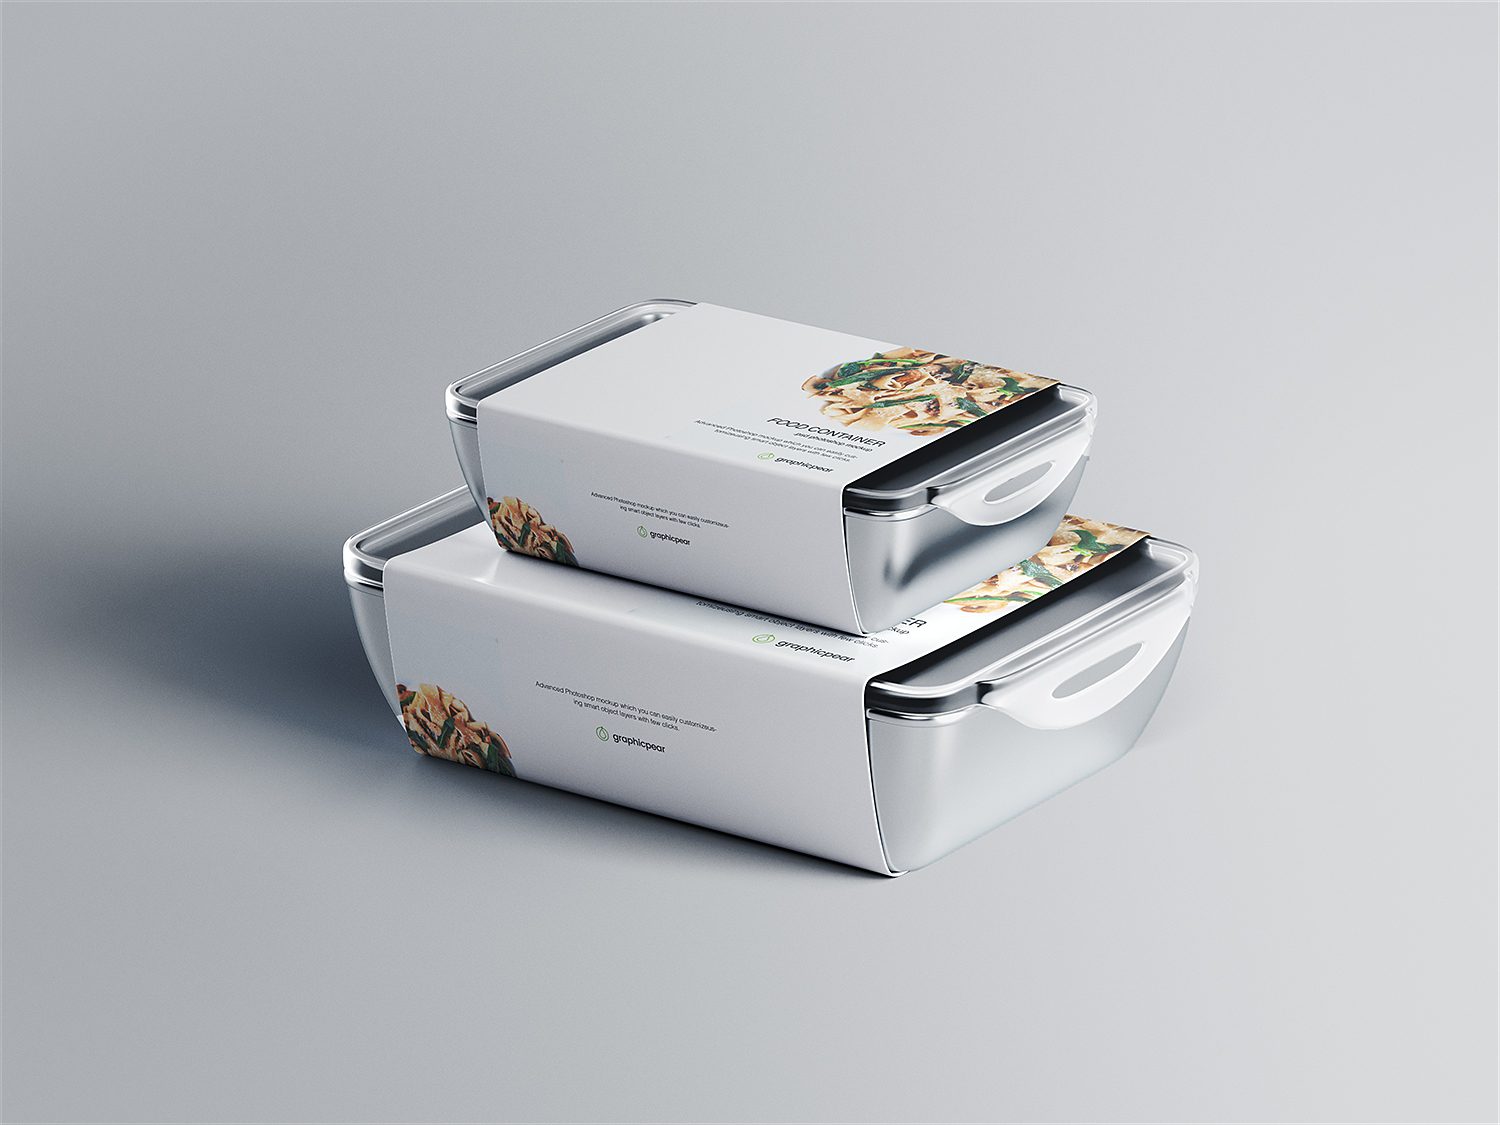 Food Container Packaging Mockup